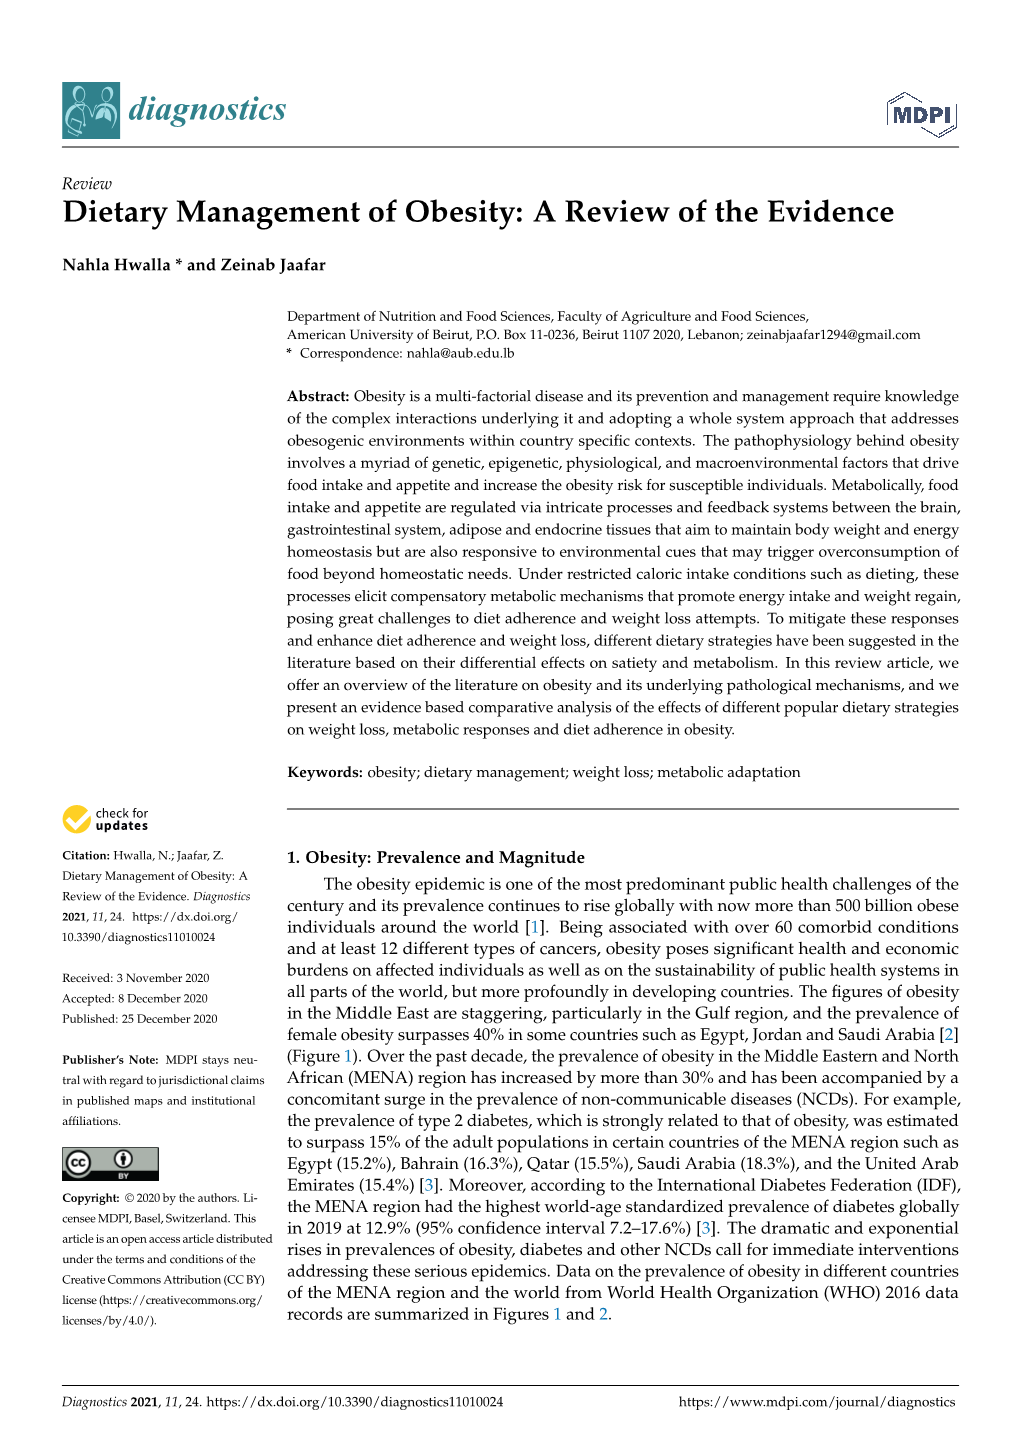 Dietary Management of Obesity: a Review of the Evidence